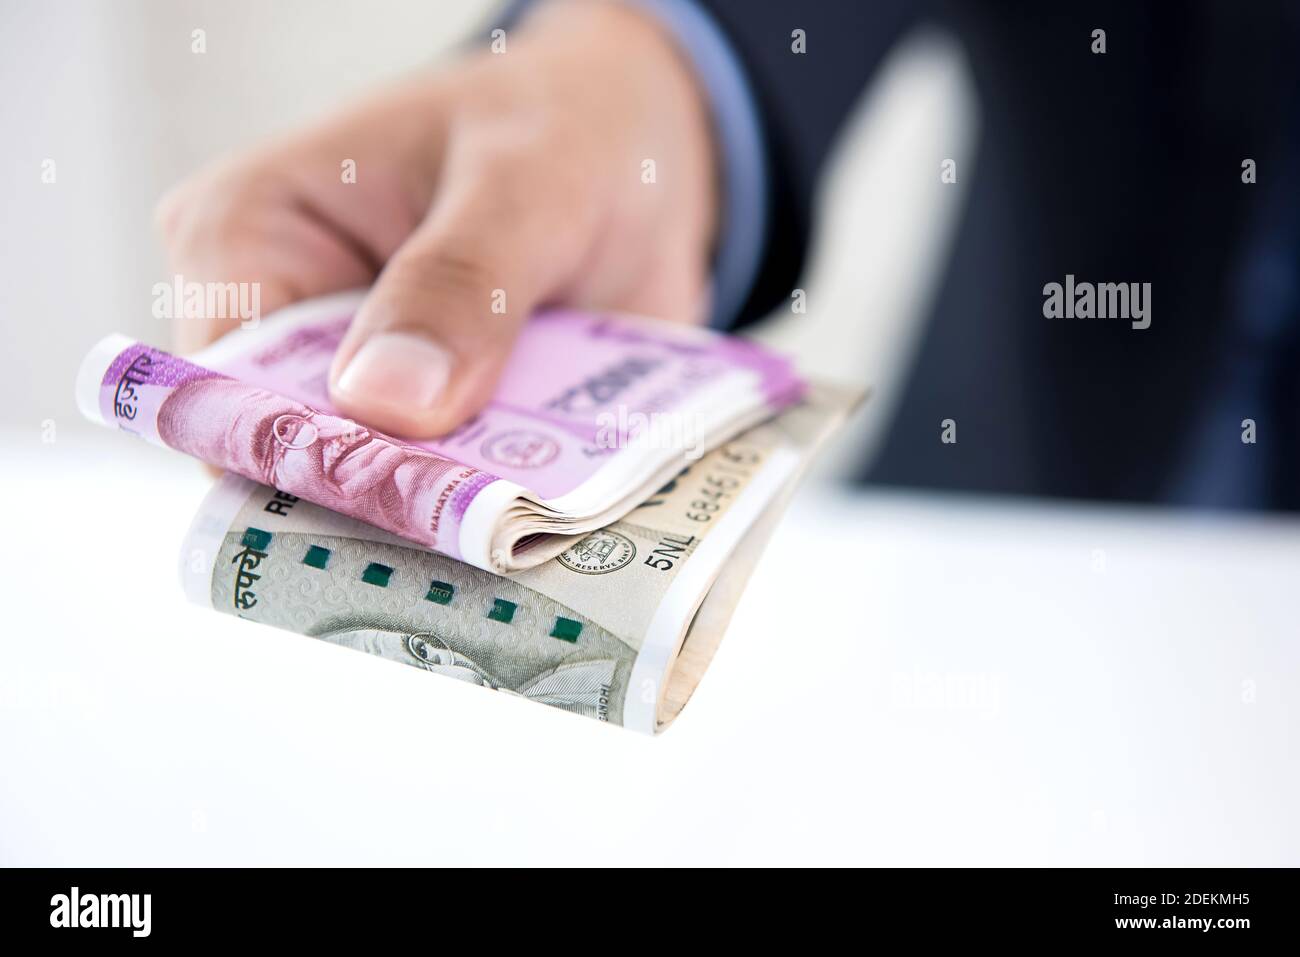 Businessman giving money in the form of Indian Rupees for services rendered Stock Photo